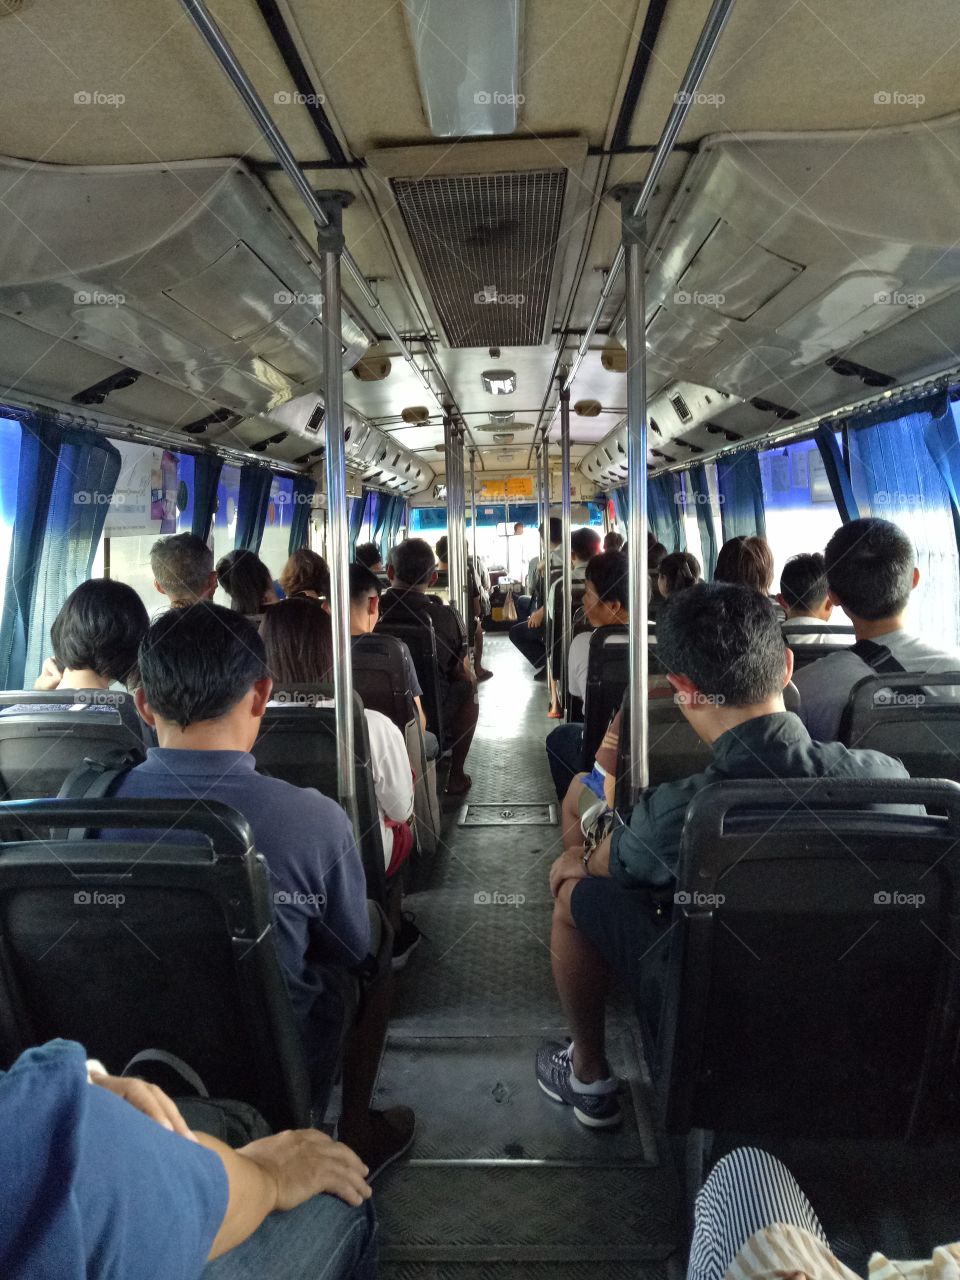 The commuting by bus in Bangkok, Thailand.